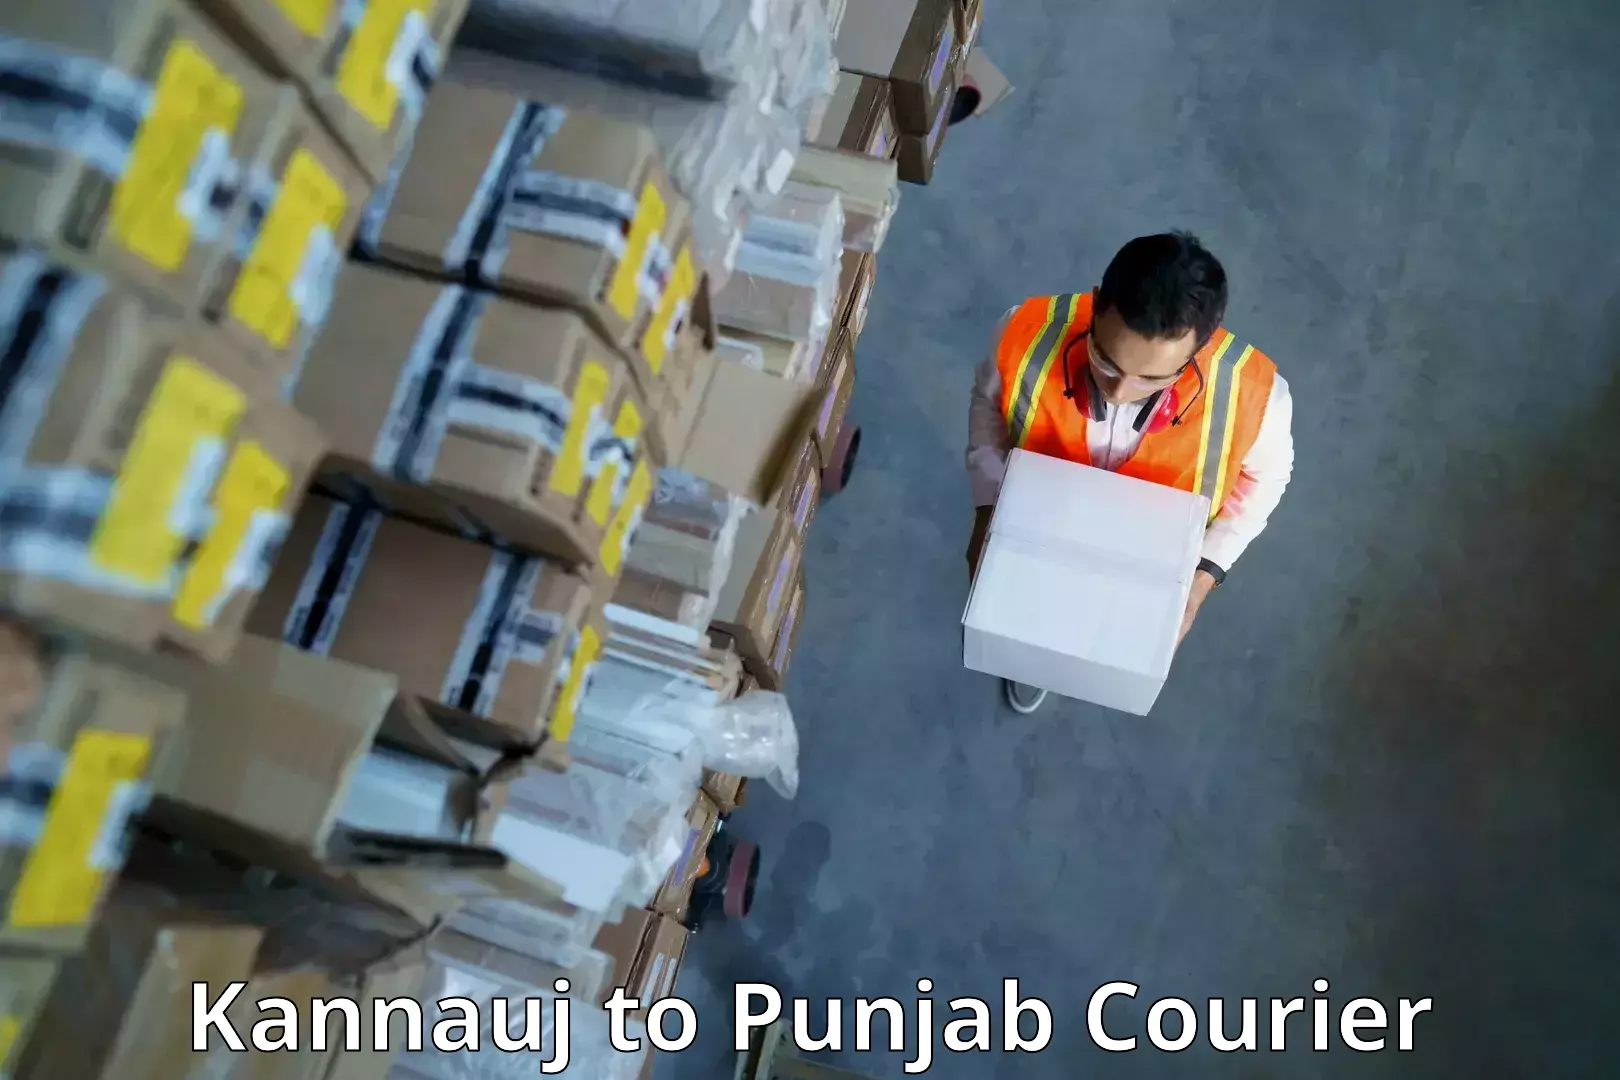 Reliable shipping partners Kannauj to Sultanpur Lodhi